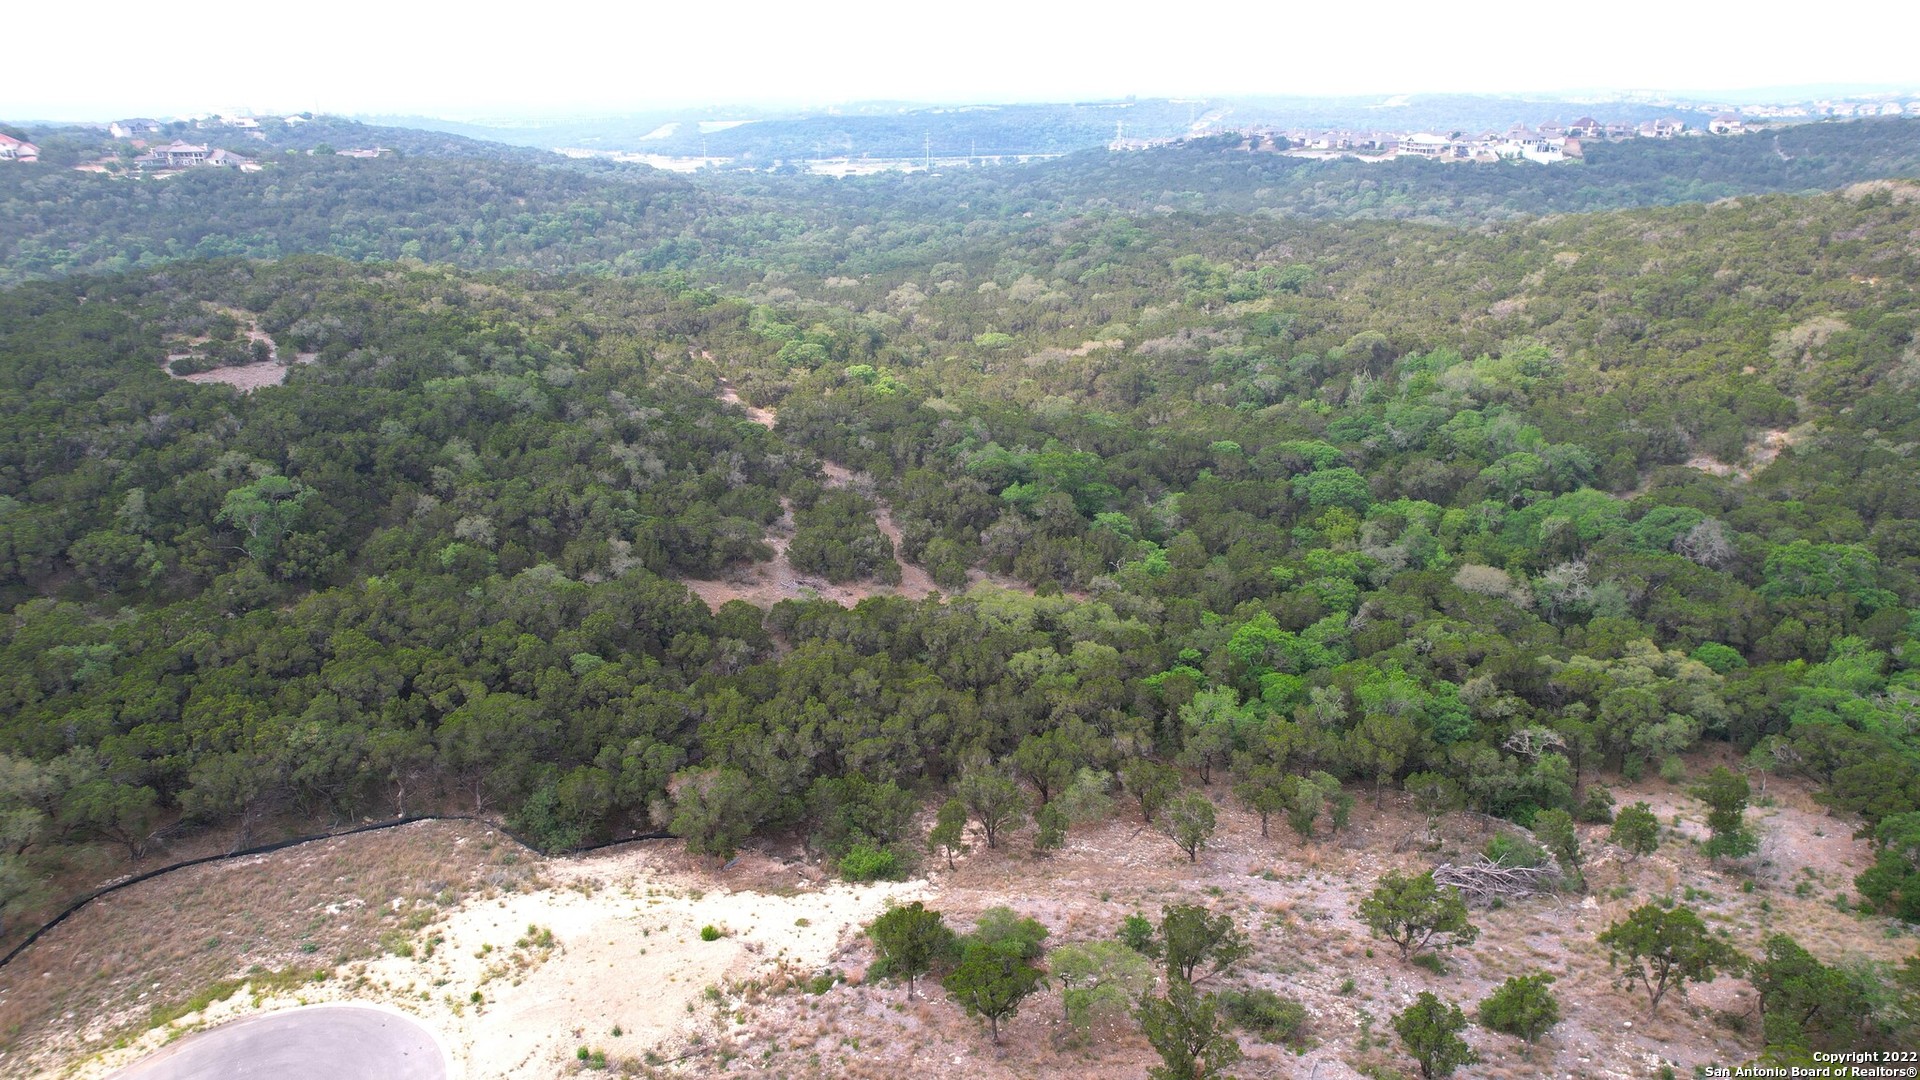 Rare opportunity. 5 acres! Build your dream home in the beautiful hill country with a valley breeze. Located on a cul-de-sac. Established neighborhood. Controlled access. North and West bordered by 7.4 Ares tree conservation. 80 acres Crown Ridge Park to the South. Valley views of parkland. Complete Privacy of 20 + acres with surroundings!! Follow green stakes to proposed building site with view. property line is roughly 40 ft past the old ranch fence. It is marked by several orange ribbons on tree limbs. Close to I10, shopping, restaurants, entertainment, 20 minutes from downtown San Antonio. Buyer to verify taxes, lot dimensions, school districts.